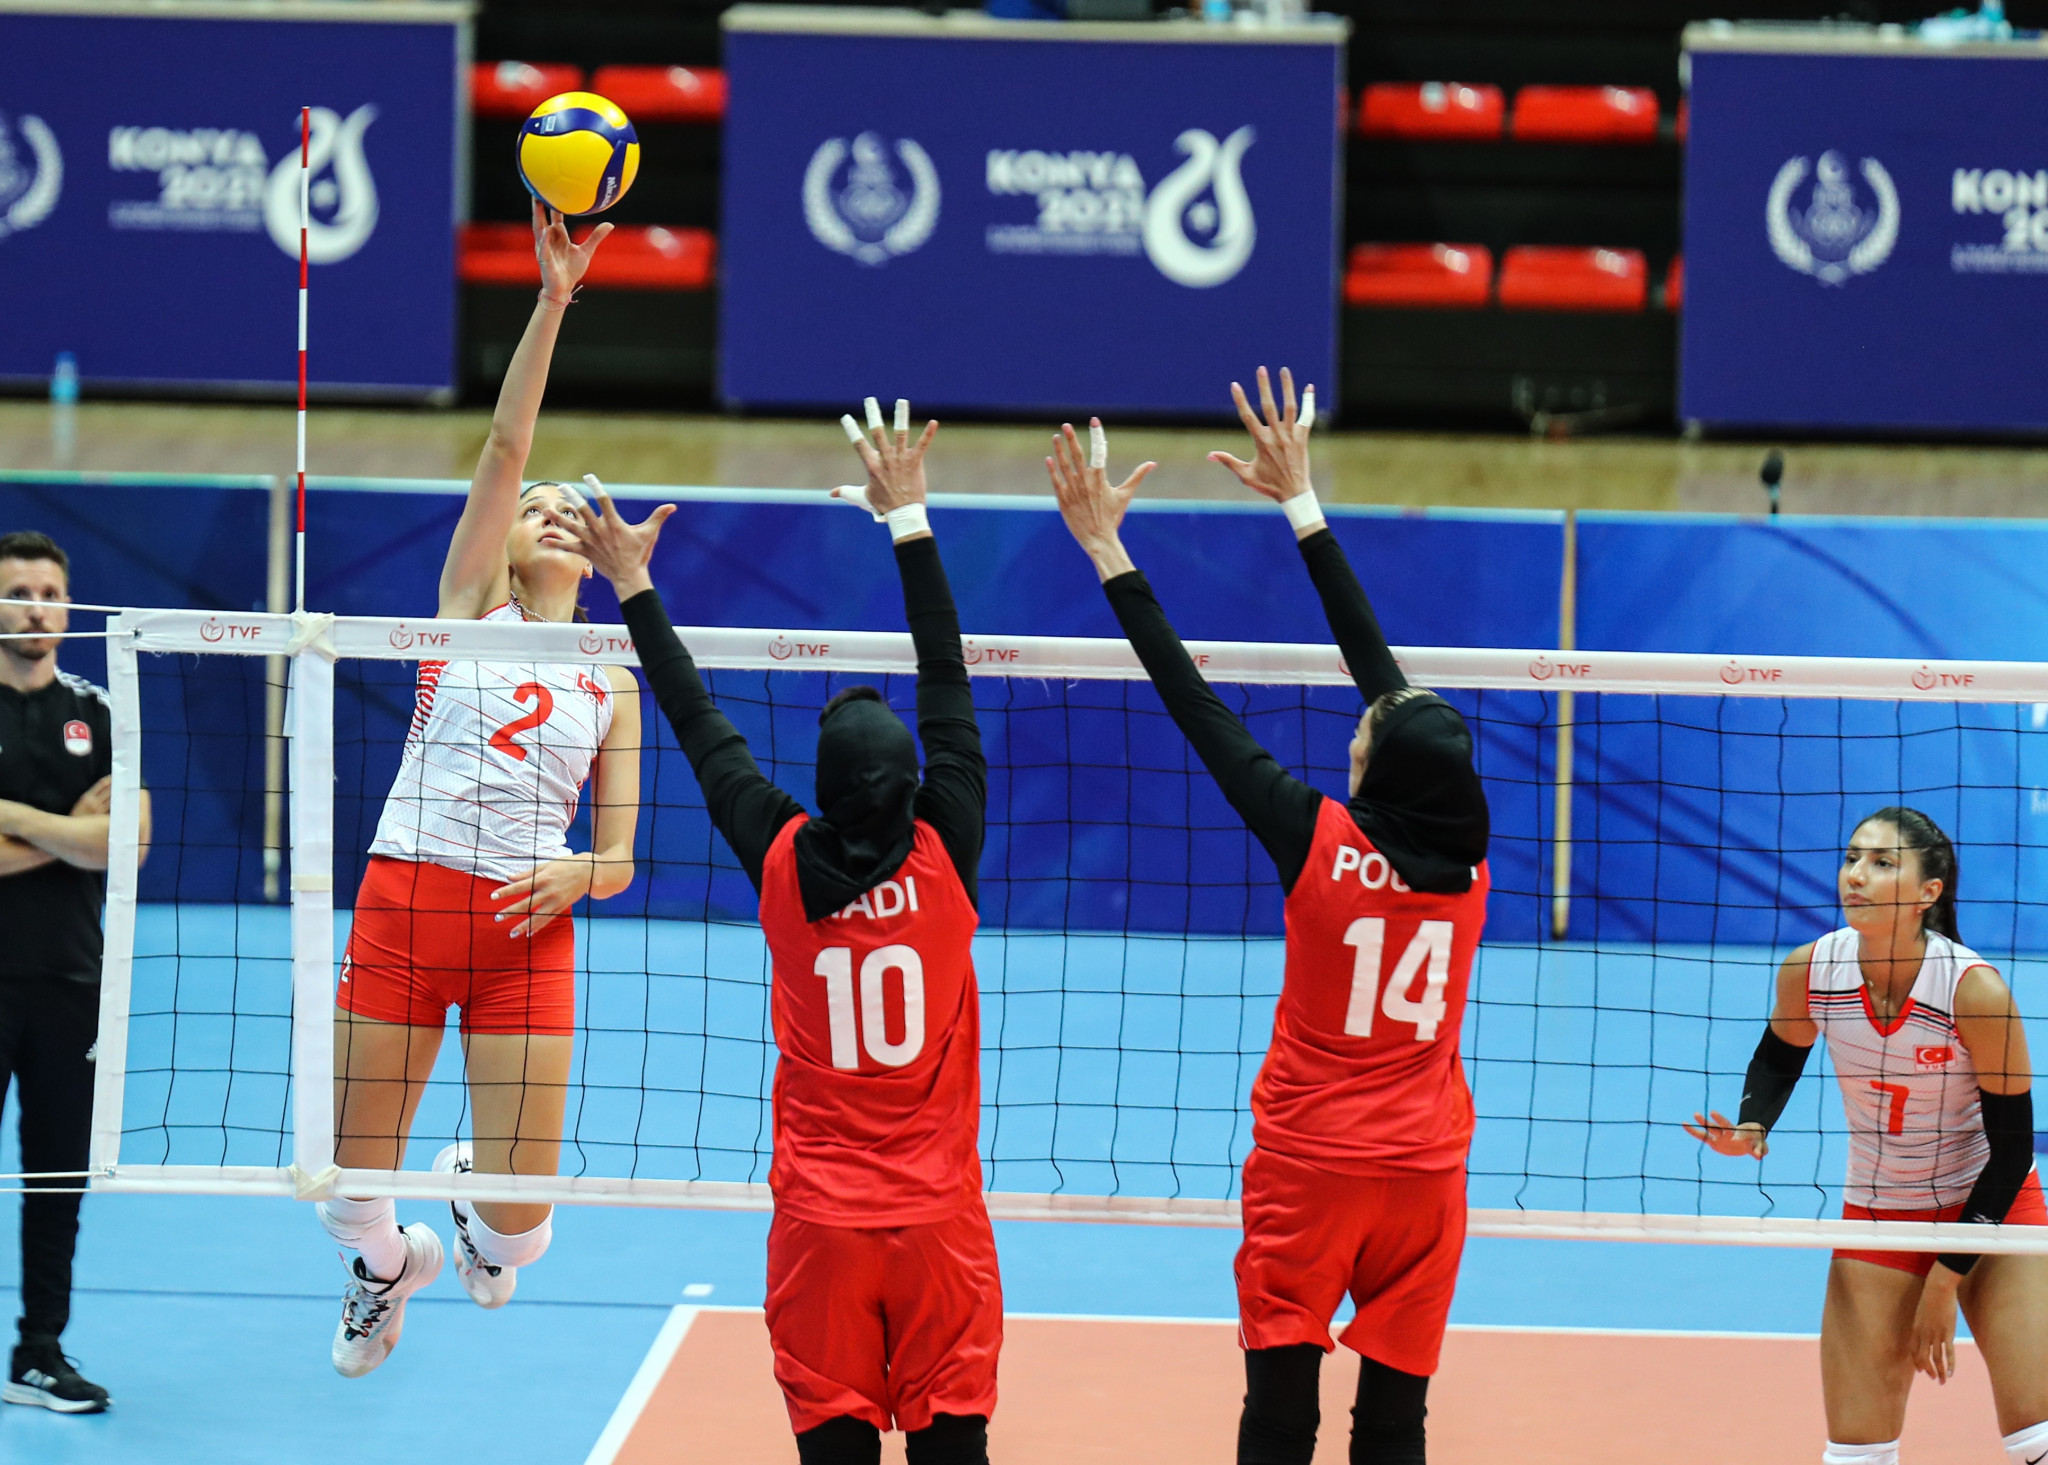 Hosts Turkey claimed a straight-sets victory over Iran in the women's volleyball group stage ©Konya 2021